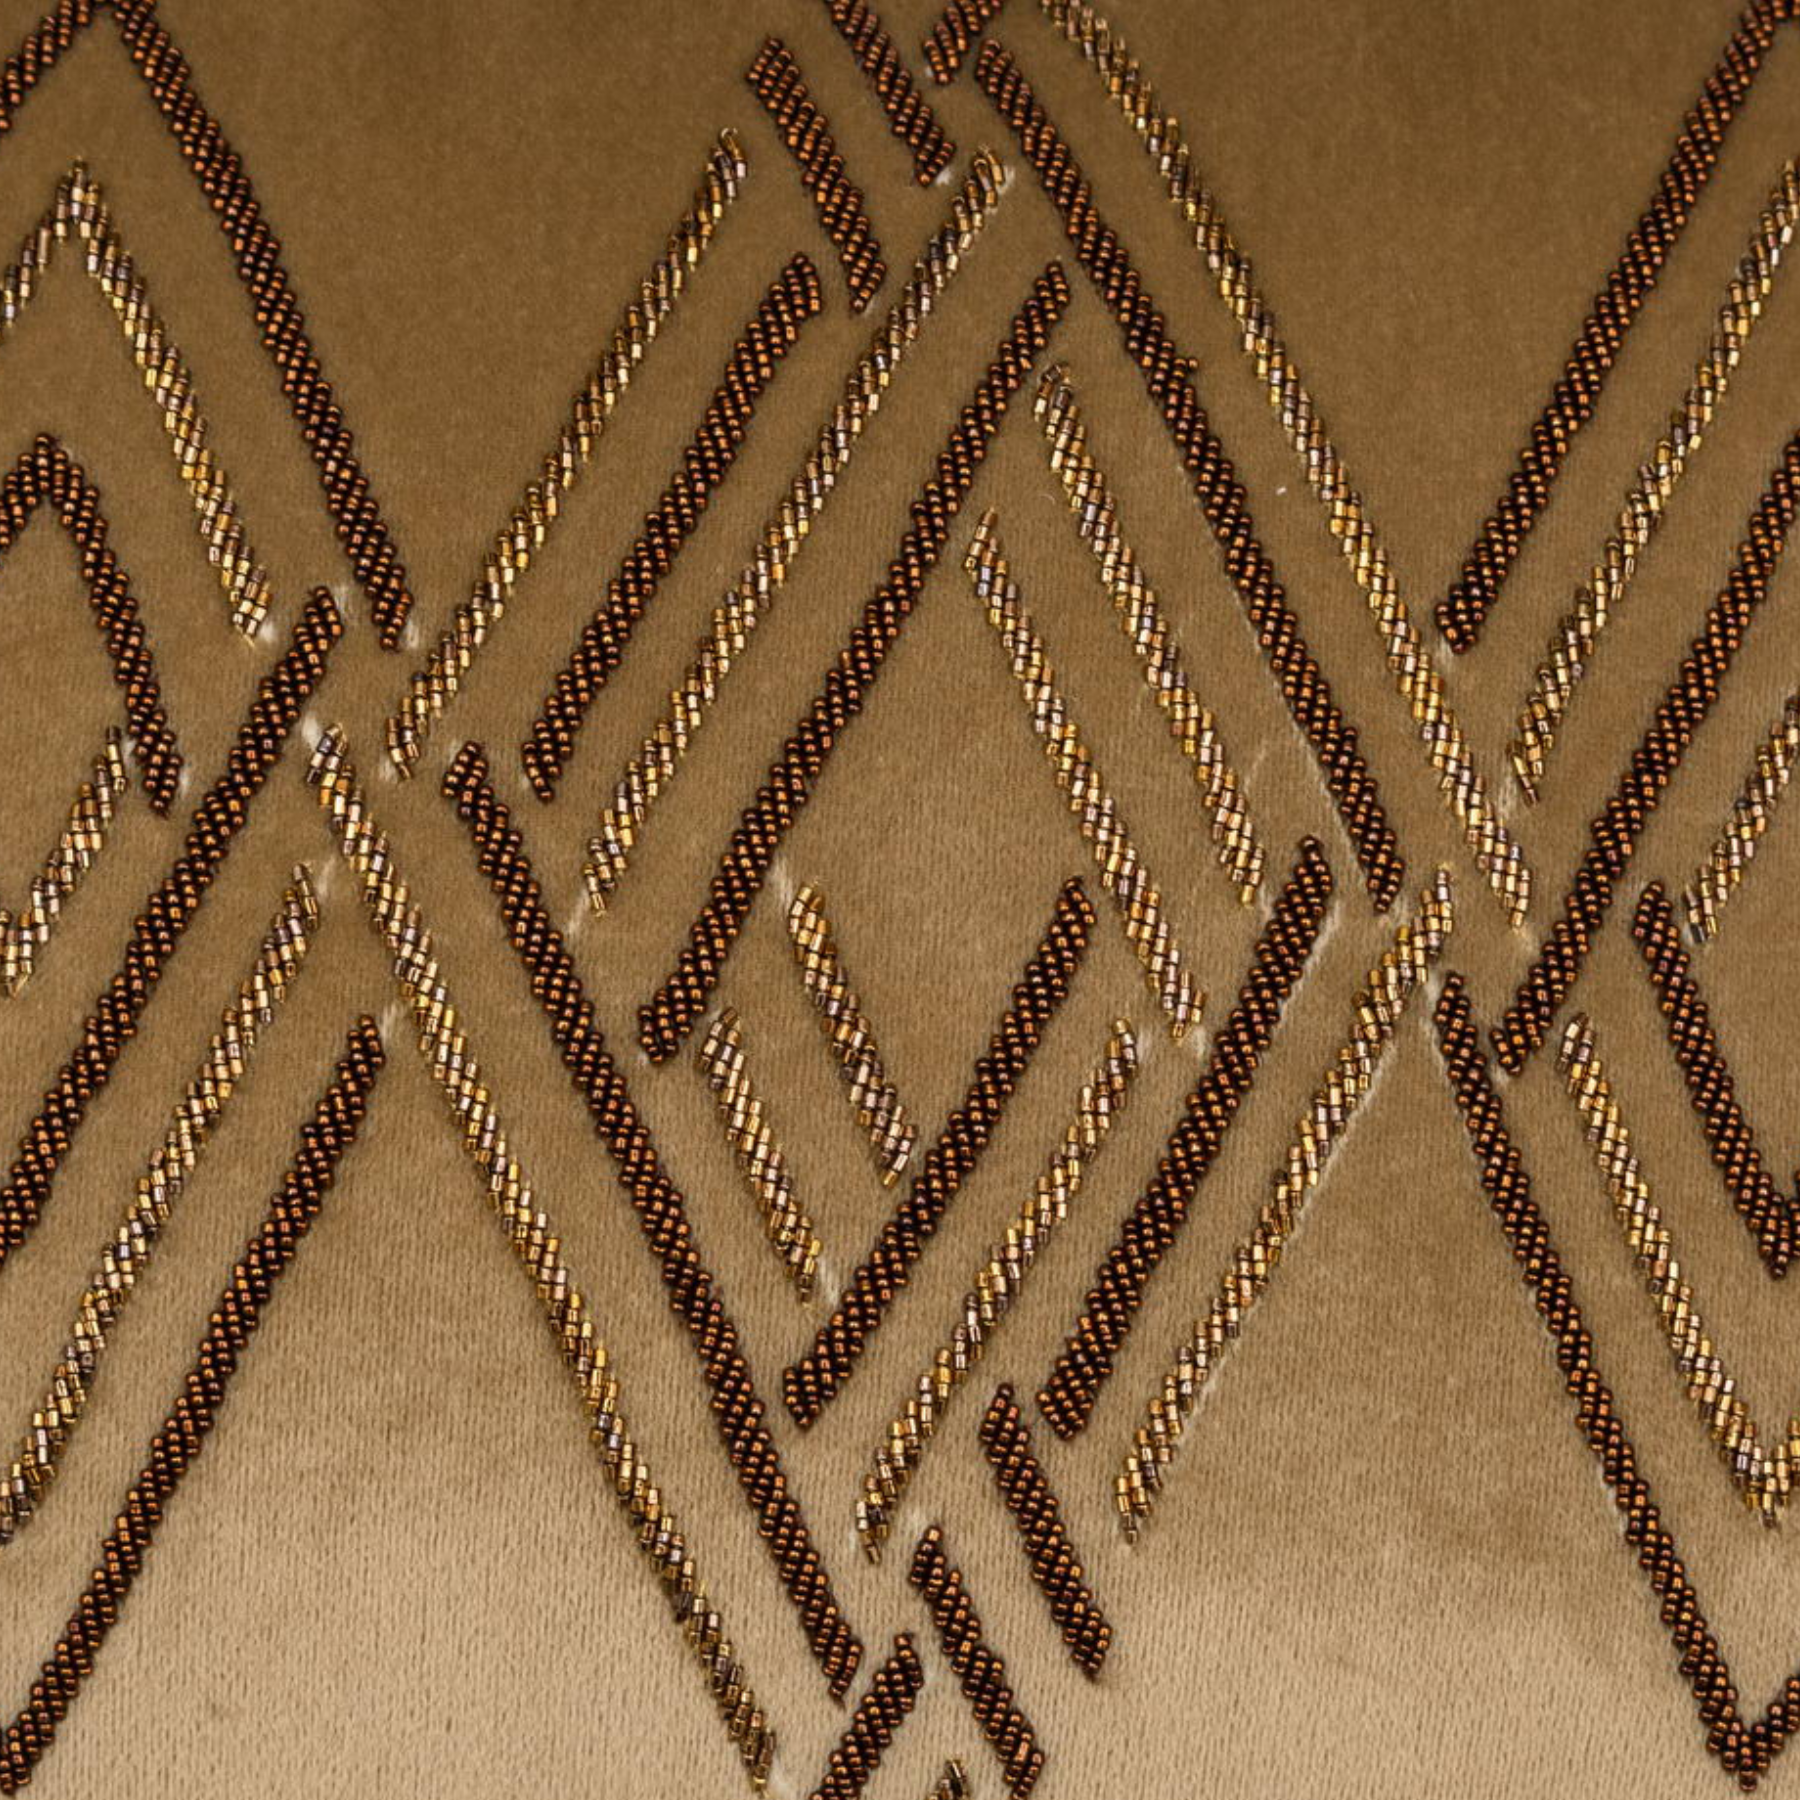 The Luxelife Handcrafted Brown Velvet Cushion Cover (Zigzag Embroidery)